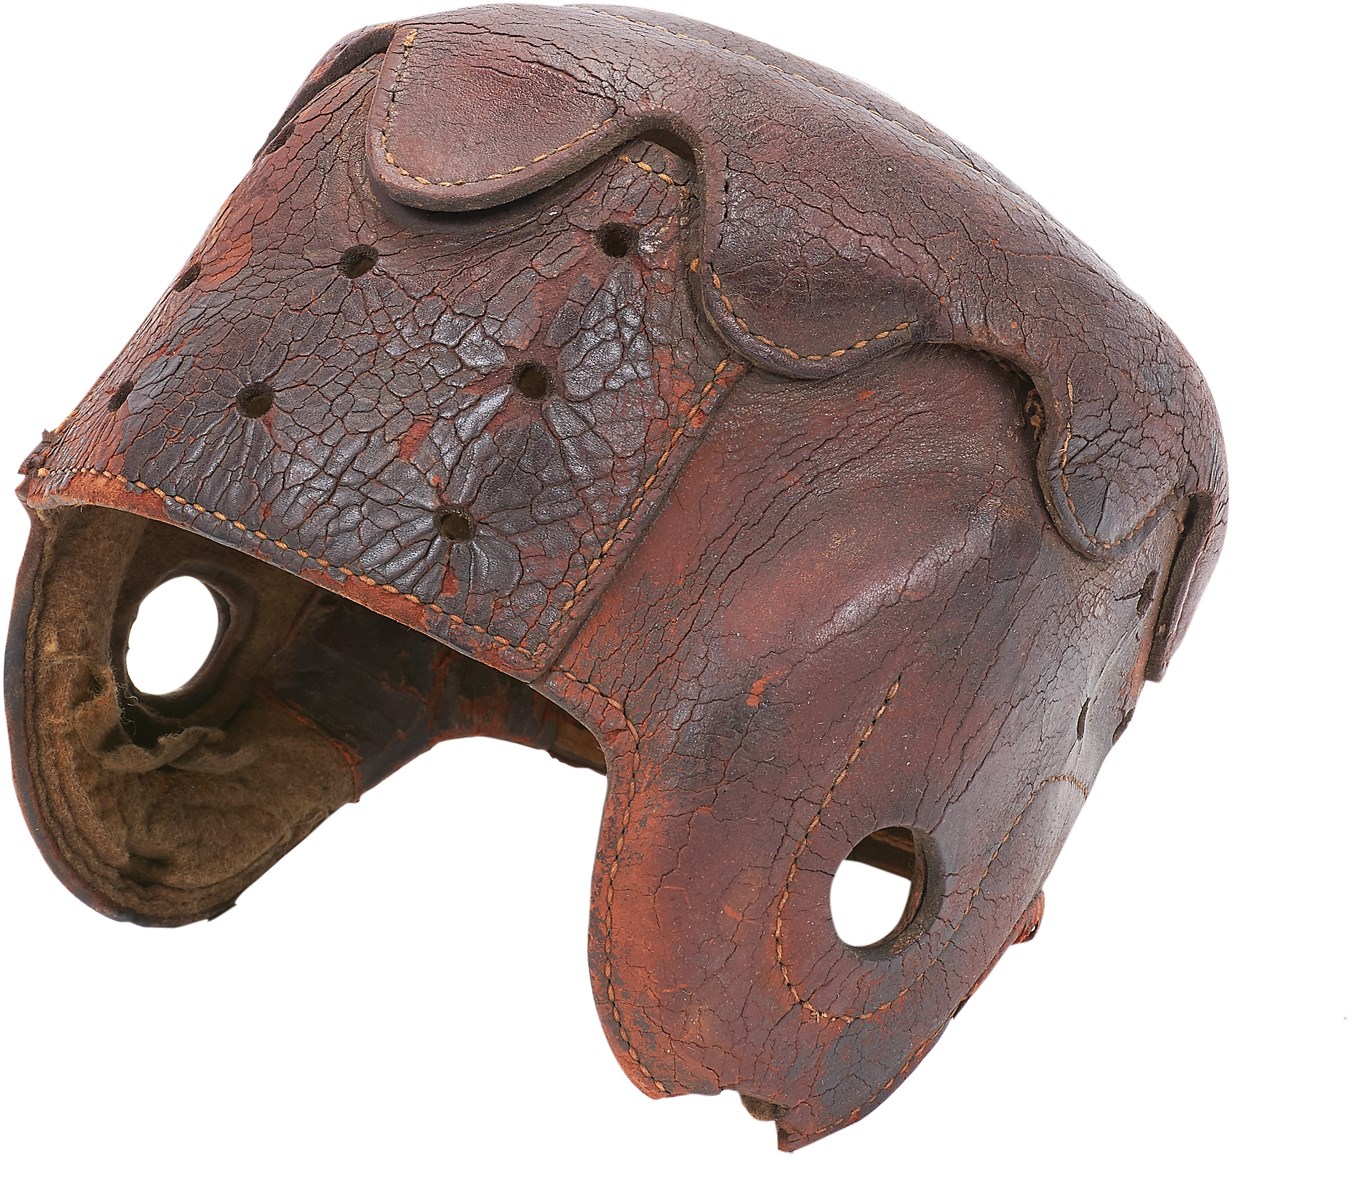 Early Princeton Style Football Helmet with Scalloped Top